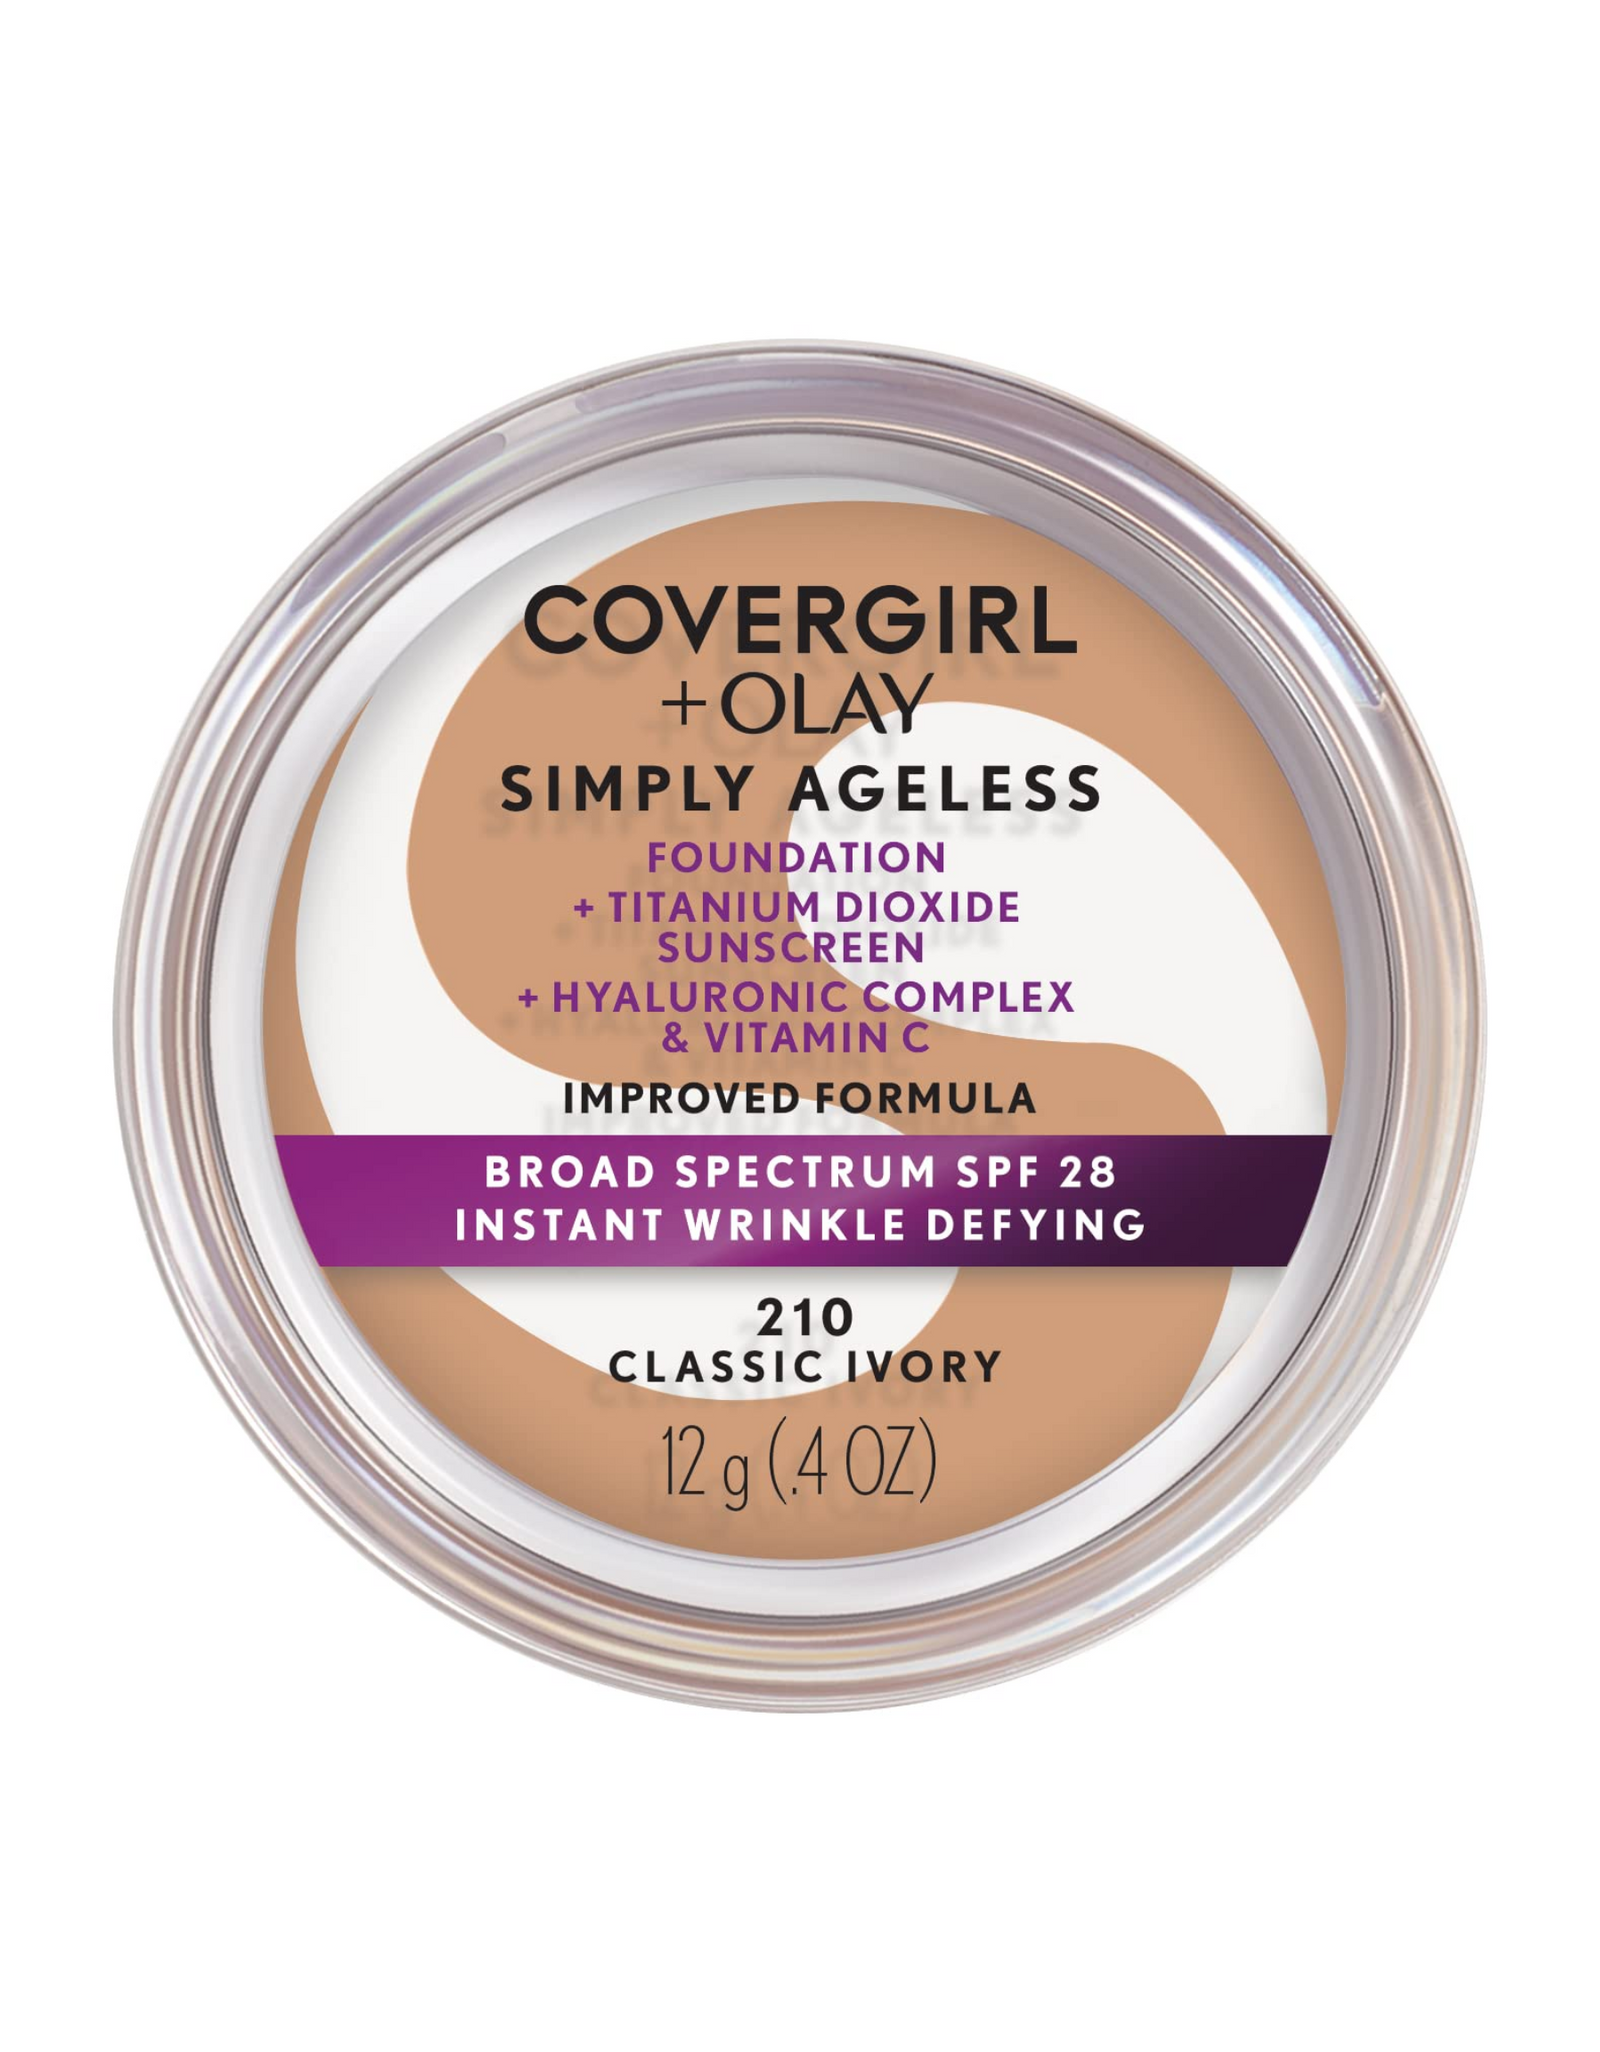 COVERGIRL+OLAY Simply Ageless Foundation with Broad Spectrum SPF 28, 205 Classic Ivory, 0.44 oz